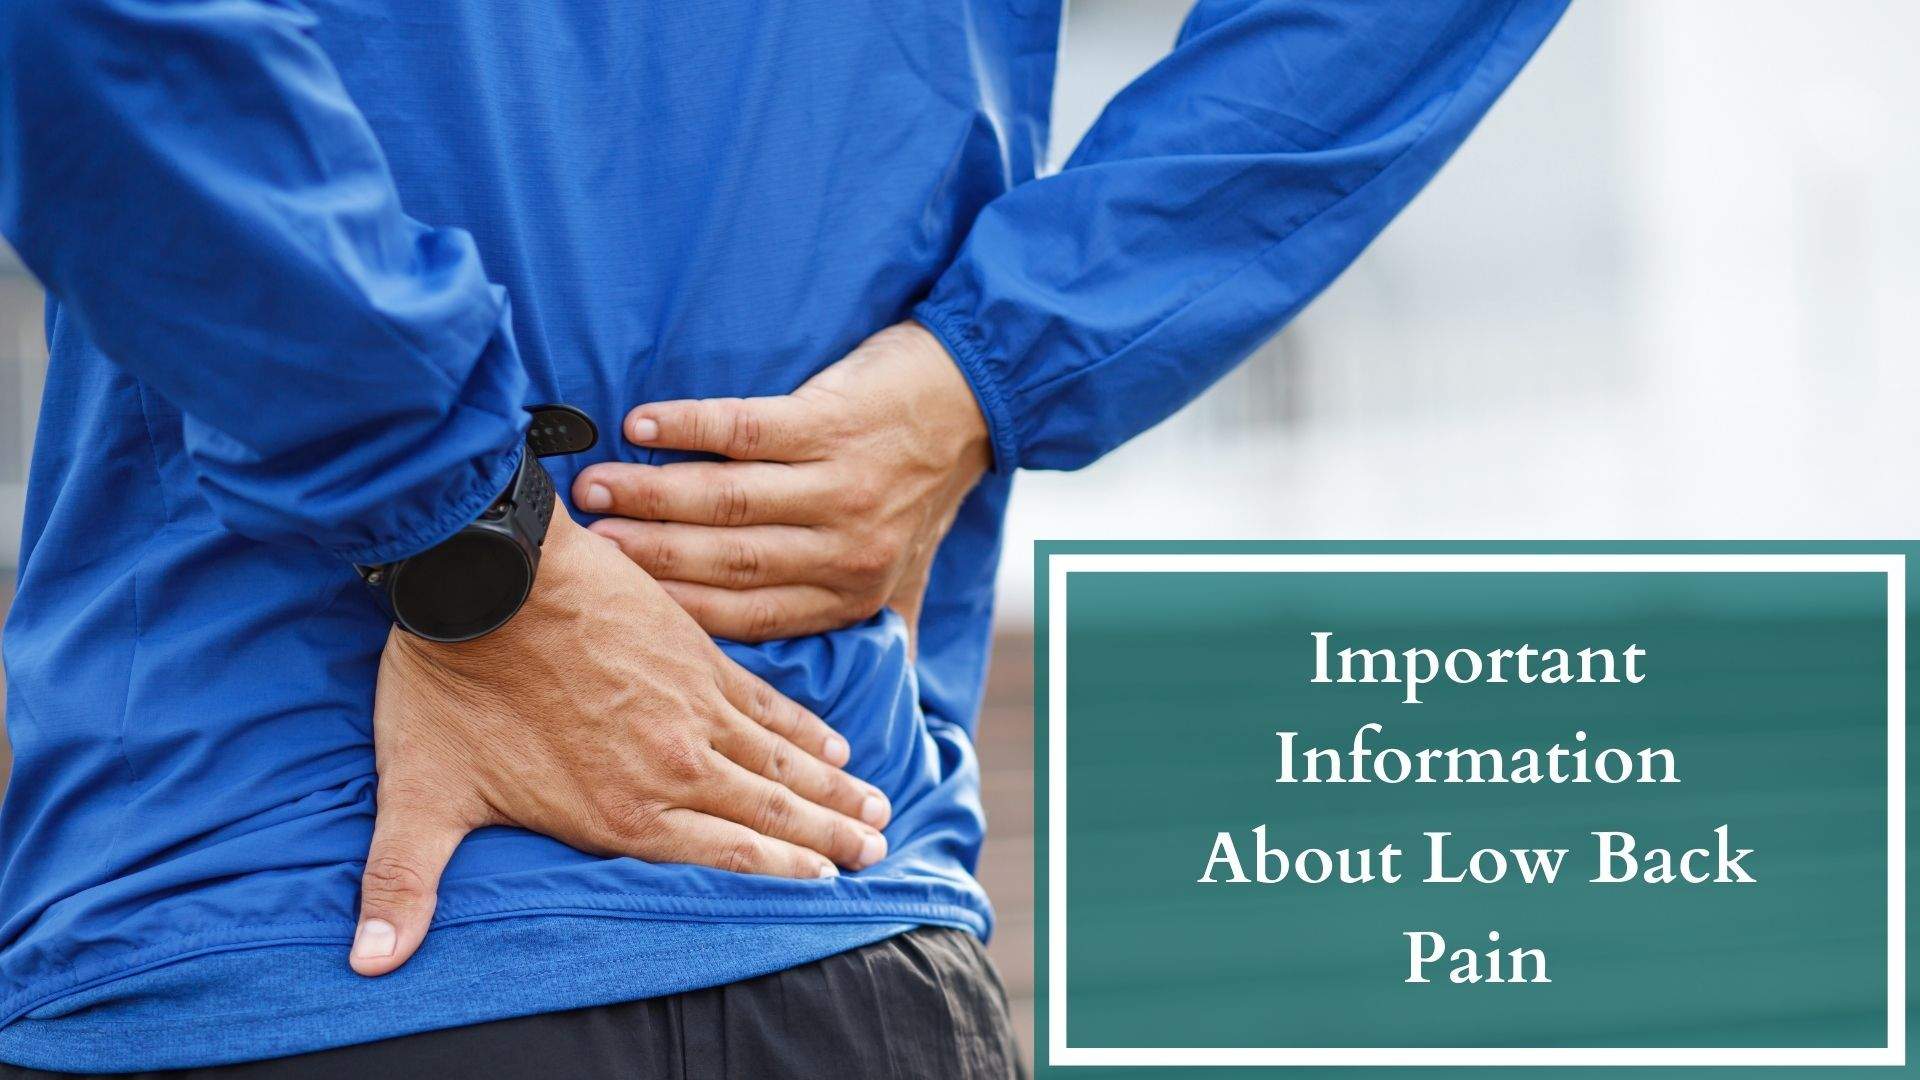 Important Information About Low Back Pain